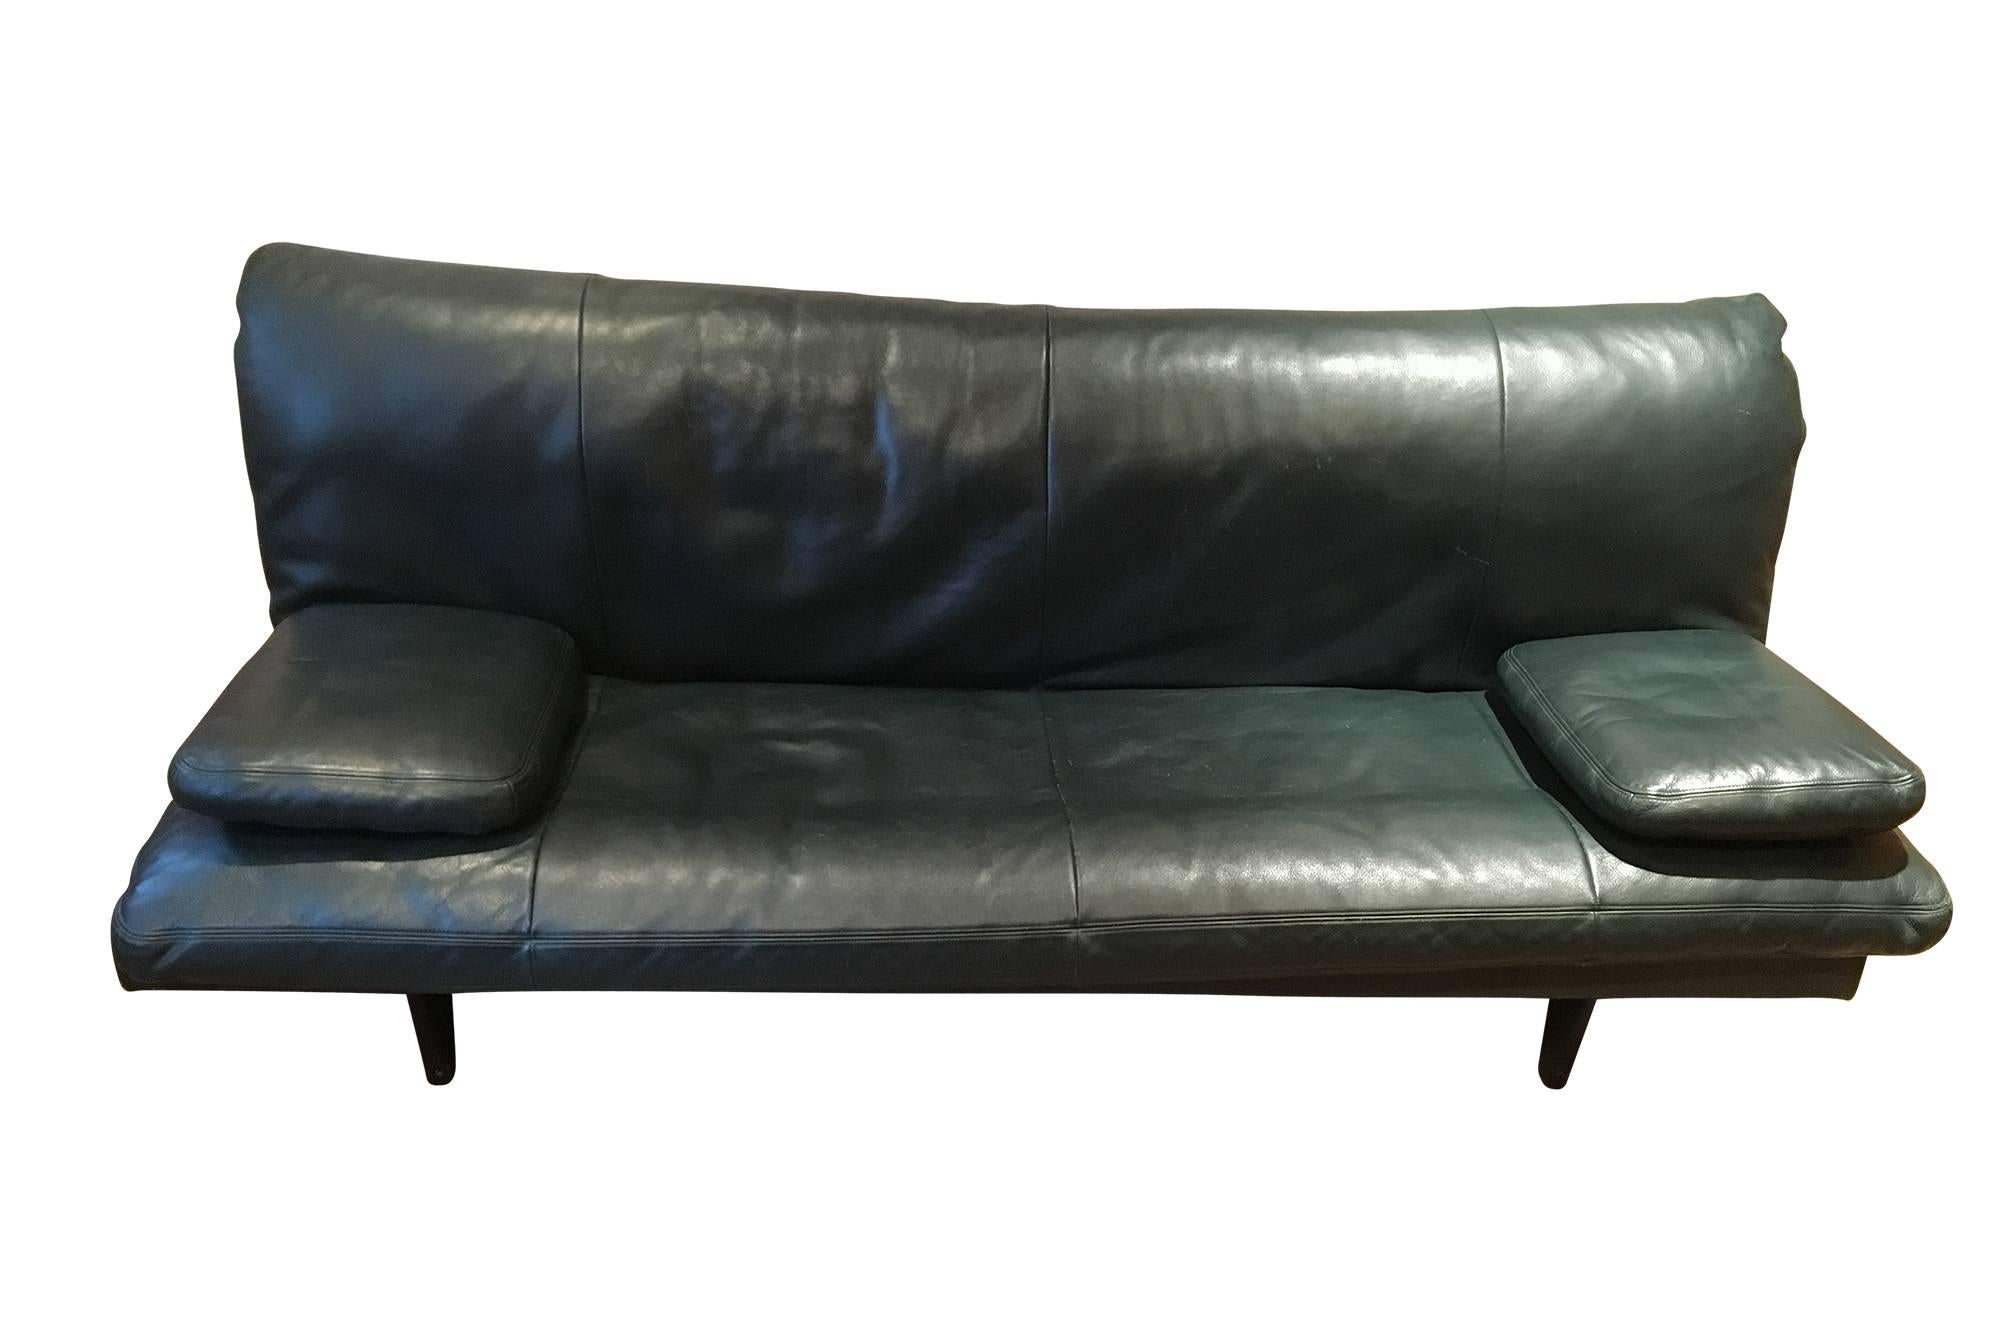 A handsome sofa or daybed by Ernst Ambühler for De Sede, circa 1970s. Cleverly designed to easily convert from a sofa to a double-size bed. Featuring high quality hunter green leather upholstery with a removable mattress cushion and two loose